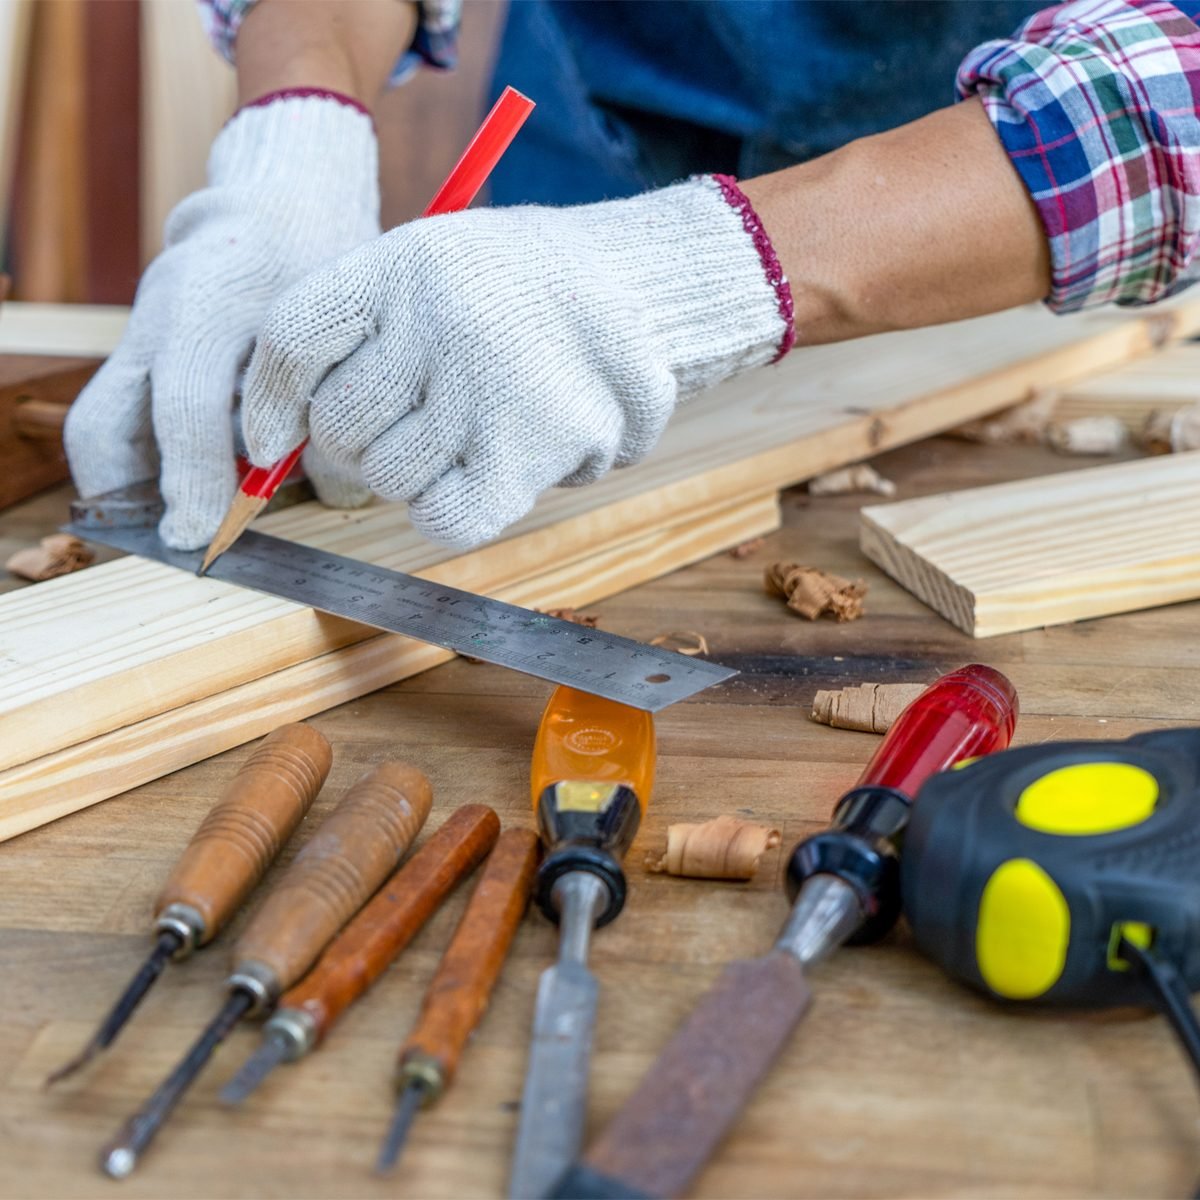 24 Must-Have Woodworking Tools for Your Workshop - Grainger KnowHow